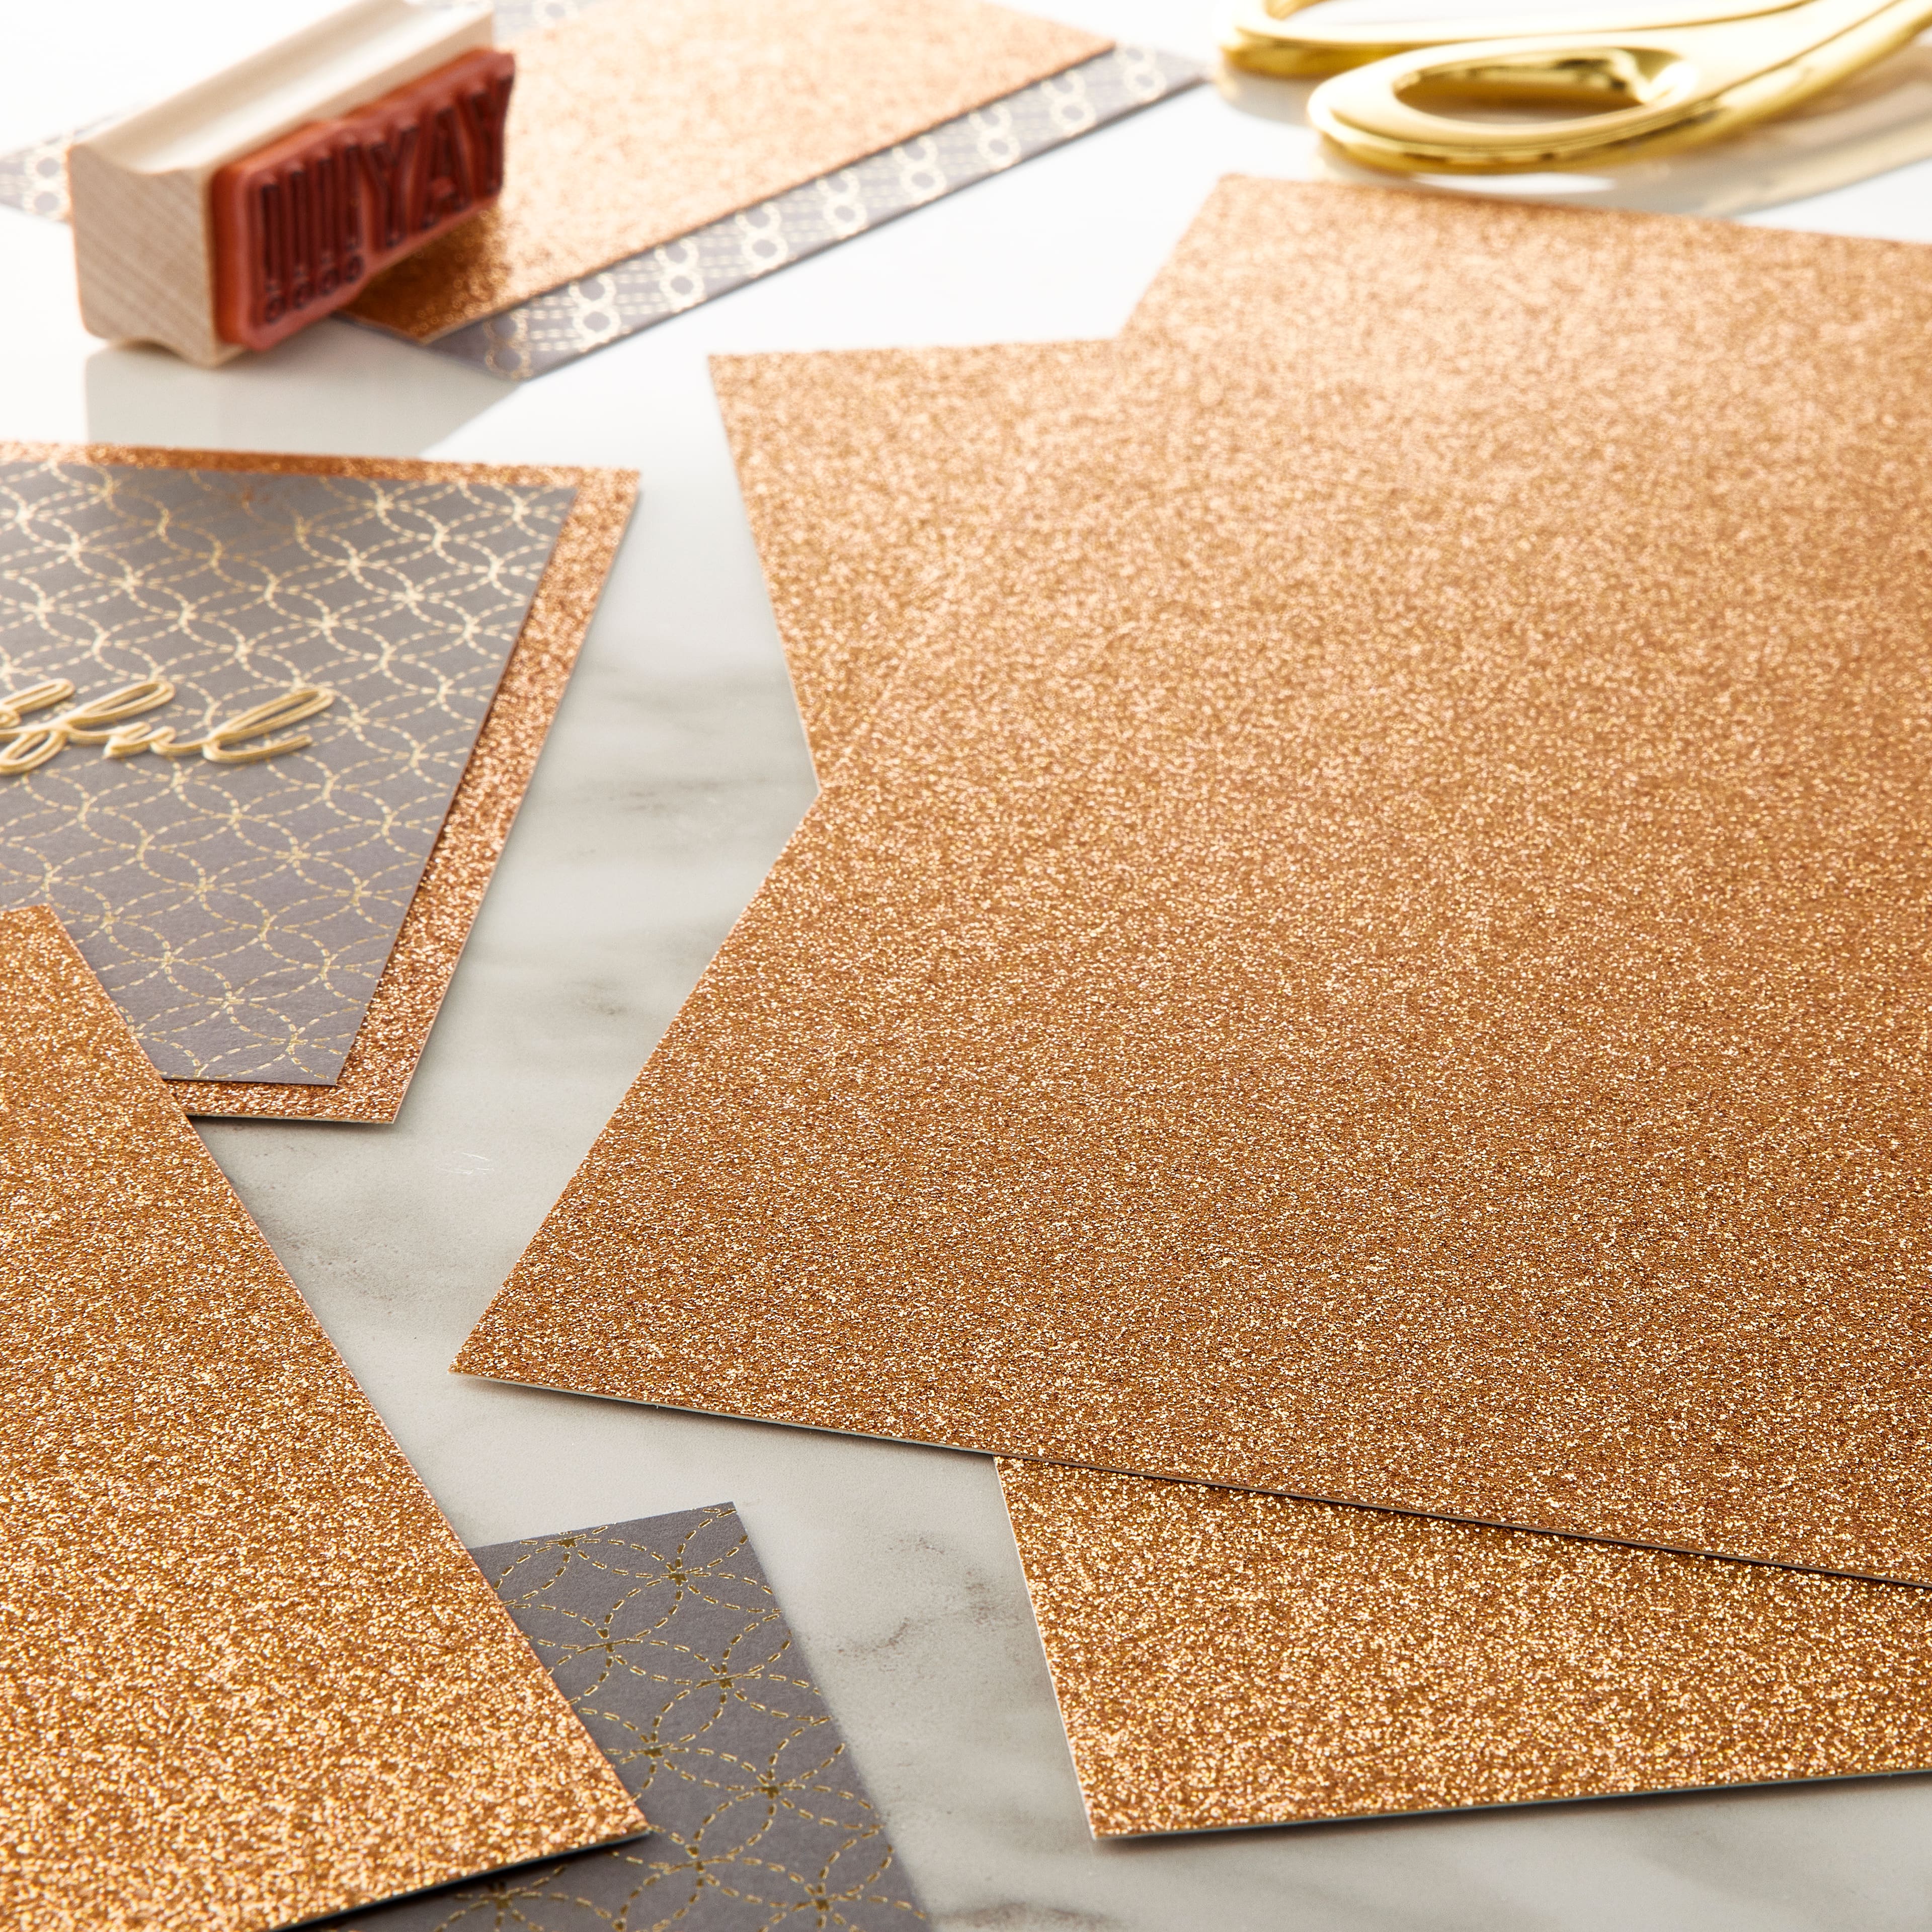 Deal on Glitter Cardstock @Michaels Stores #papercrafters #deal #micha